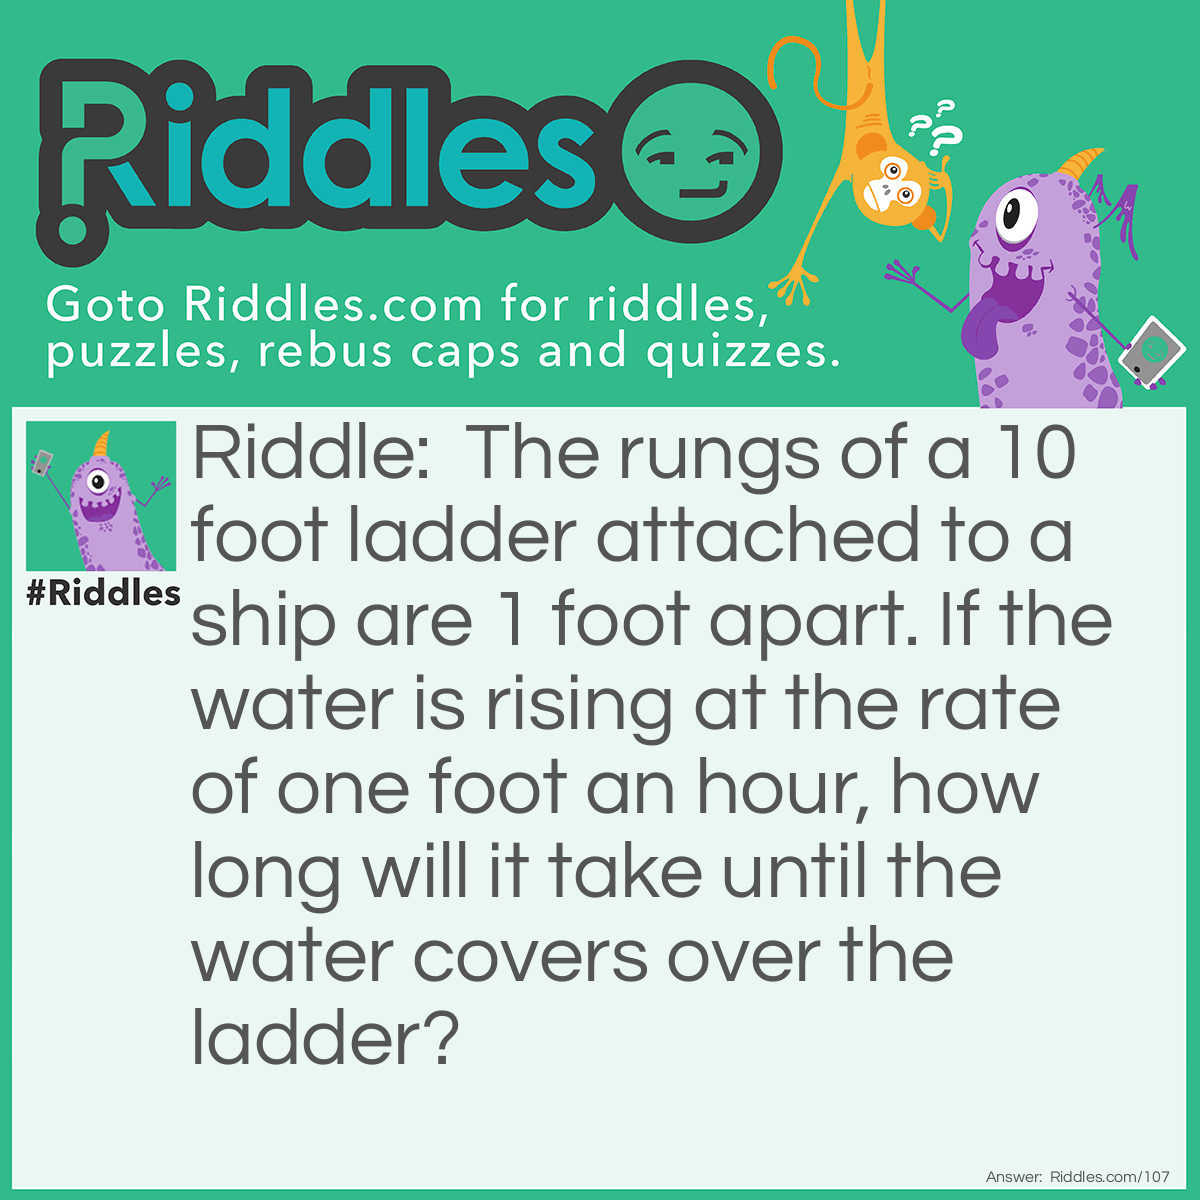 Riddle: The rungs of a 10-foot ladder attached to a ship are 1 foot apart. If the water is rising at the rate of one foot an hour, how long will it take until the water covers the ladder? Answer: It will never cover the ladder because as the water rises, so will the floating ship.